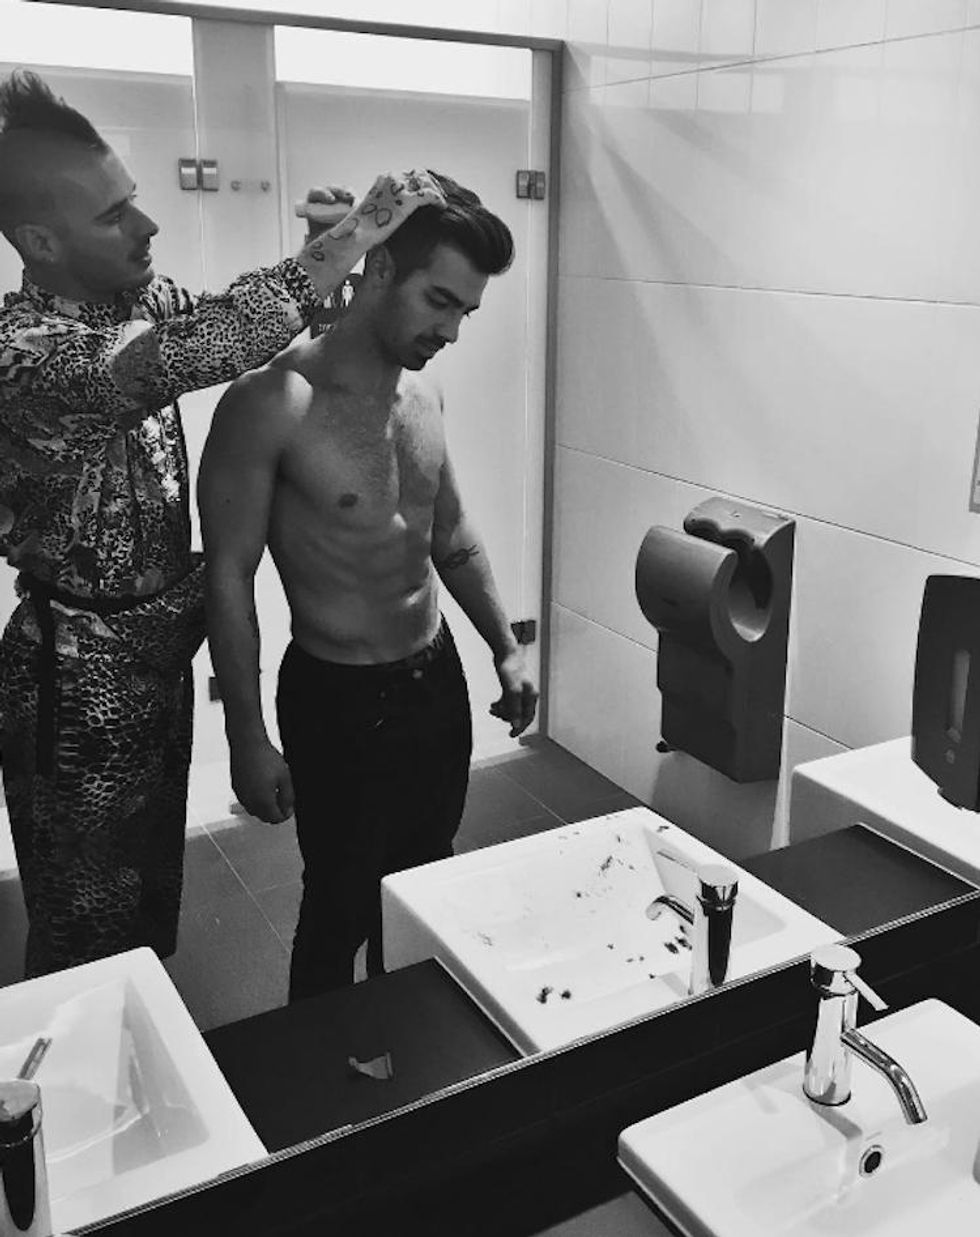 Even when he's getting a haircut (shirtless), he looks amazing.